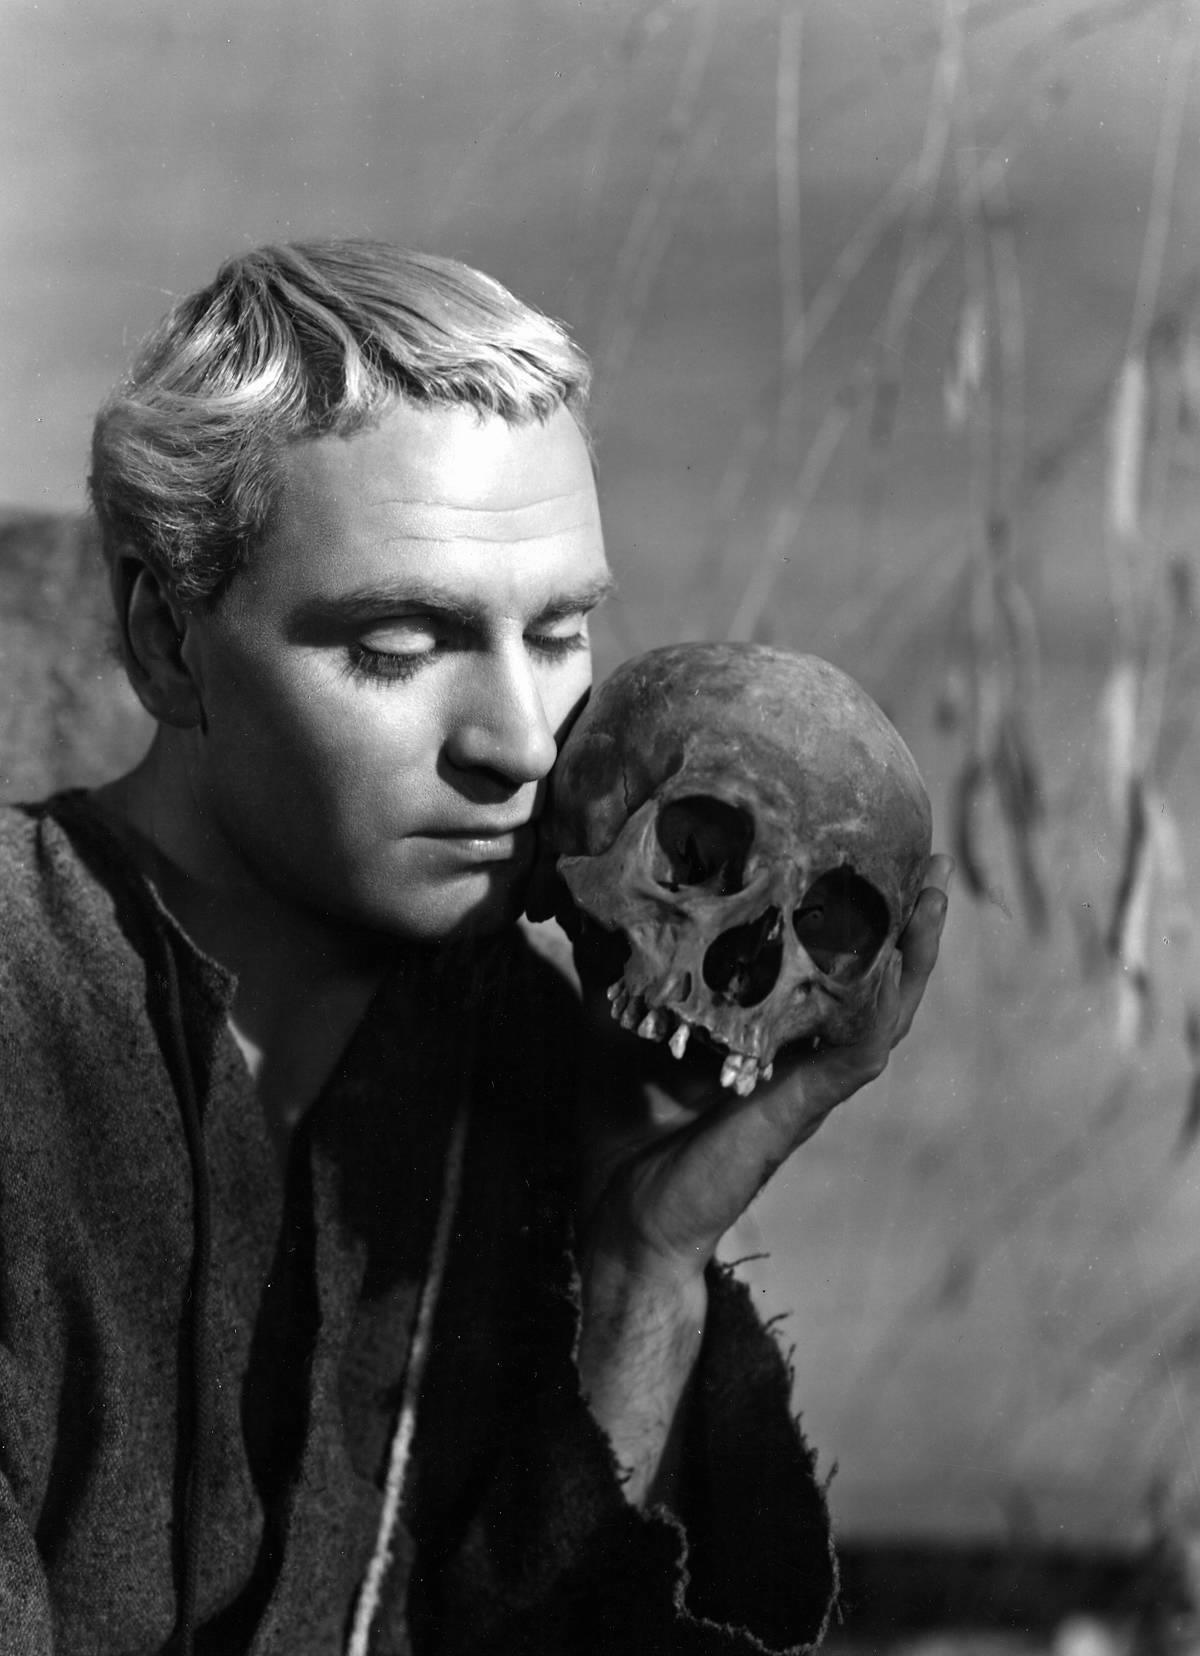 <p>The 1948 version of Shakespeare's <i>Hamlet</i> was directed by and starred Laurence Olivier. Olivier's adaptation won an Academy Award for Best Picture and was the first sound version produced in English. </p> <p>Olivier won the Oscar for Best Actor, and his film won the Academy Award for Art Direction, Set Direction, and Costume Design due to the movie's authenticity. </p>